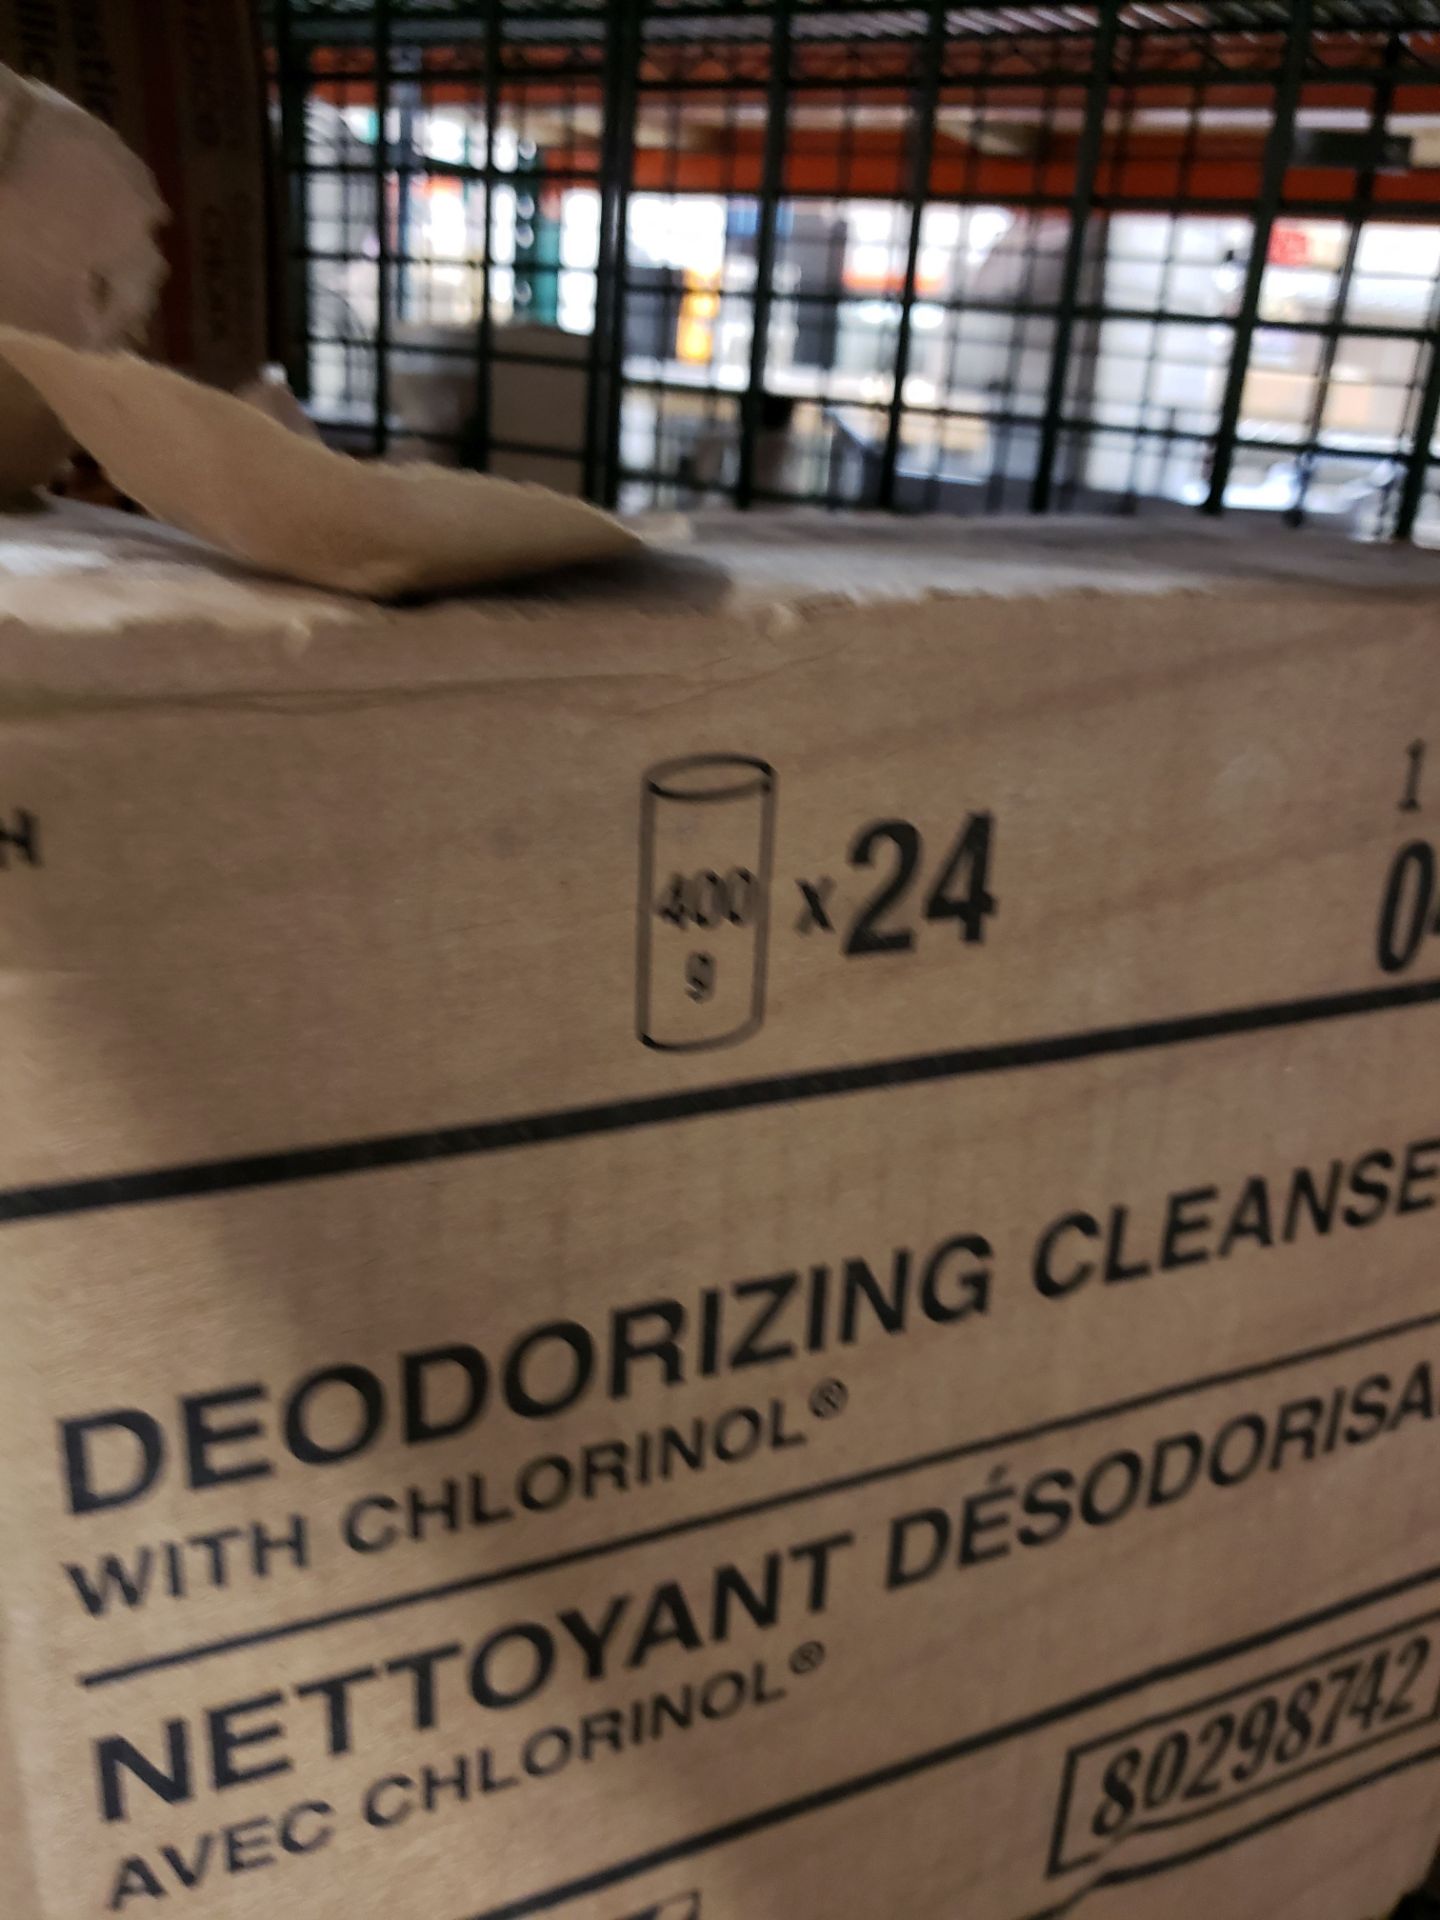 Comet Deodorizing Cleanser with Chlorinol - 22 x 400gr Cans - Image 3 of 3